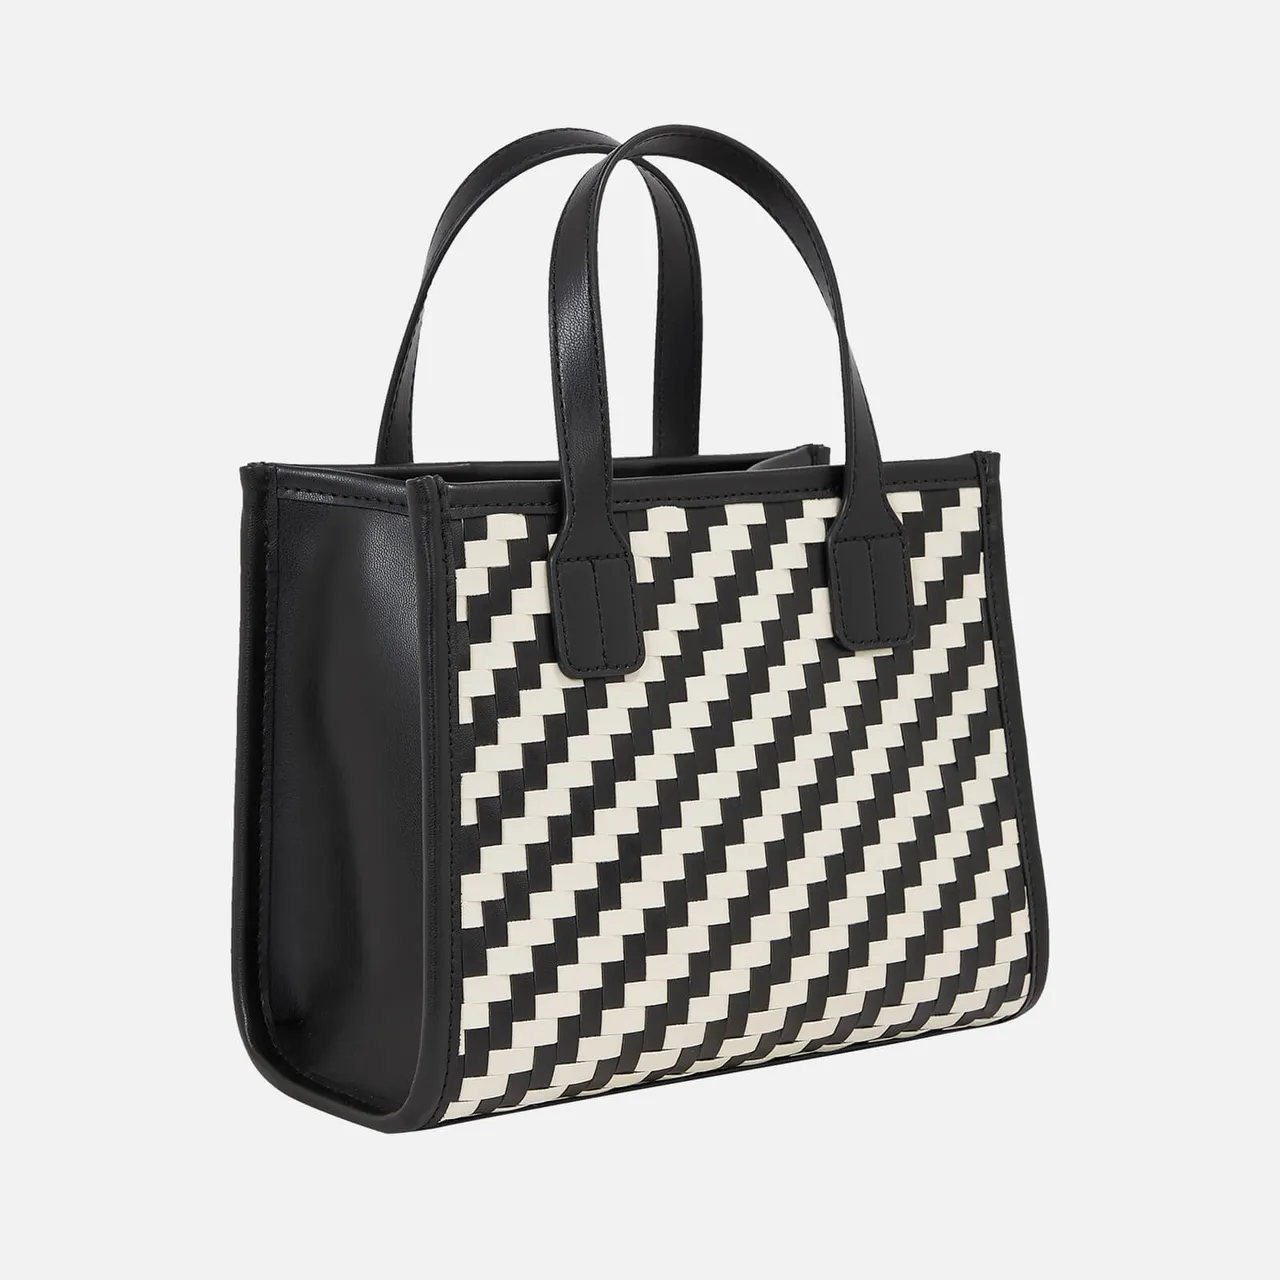 Tommy Hilfiger TH City Woven Faux Leather Tote Bag